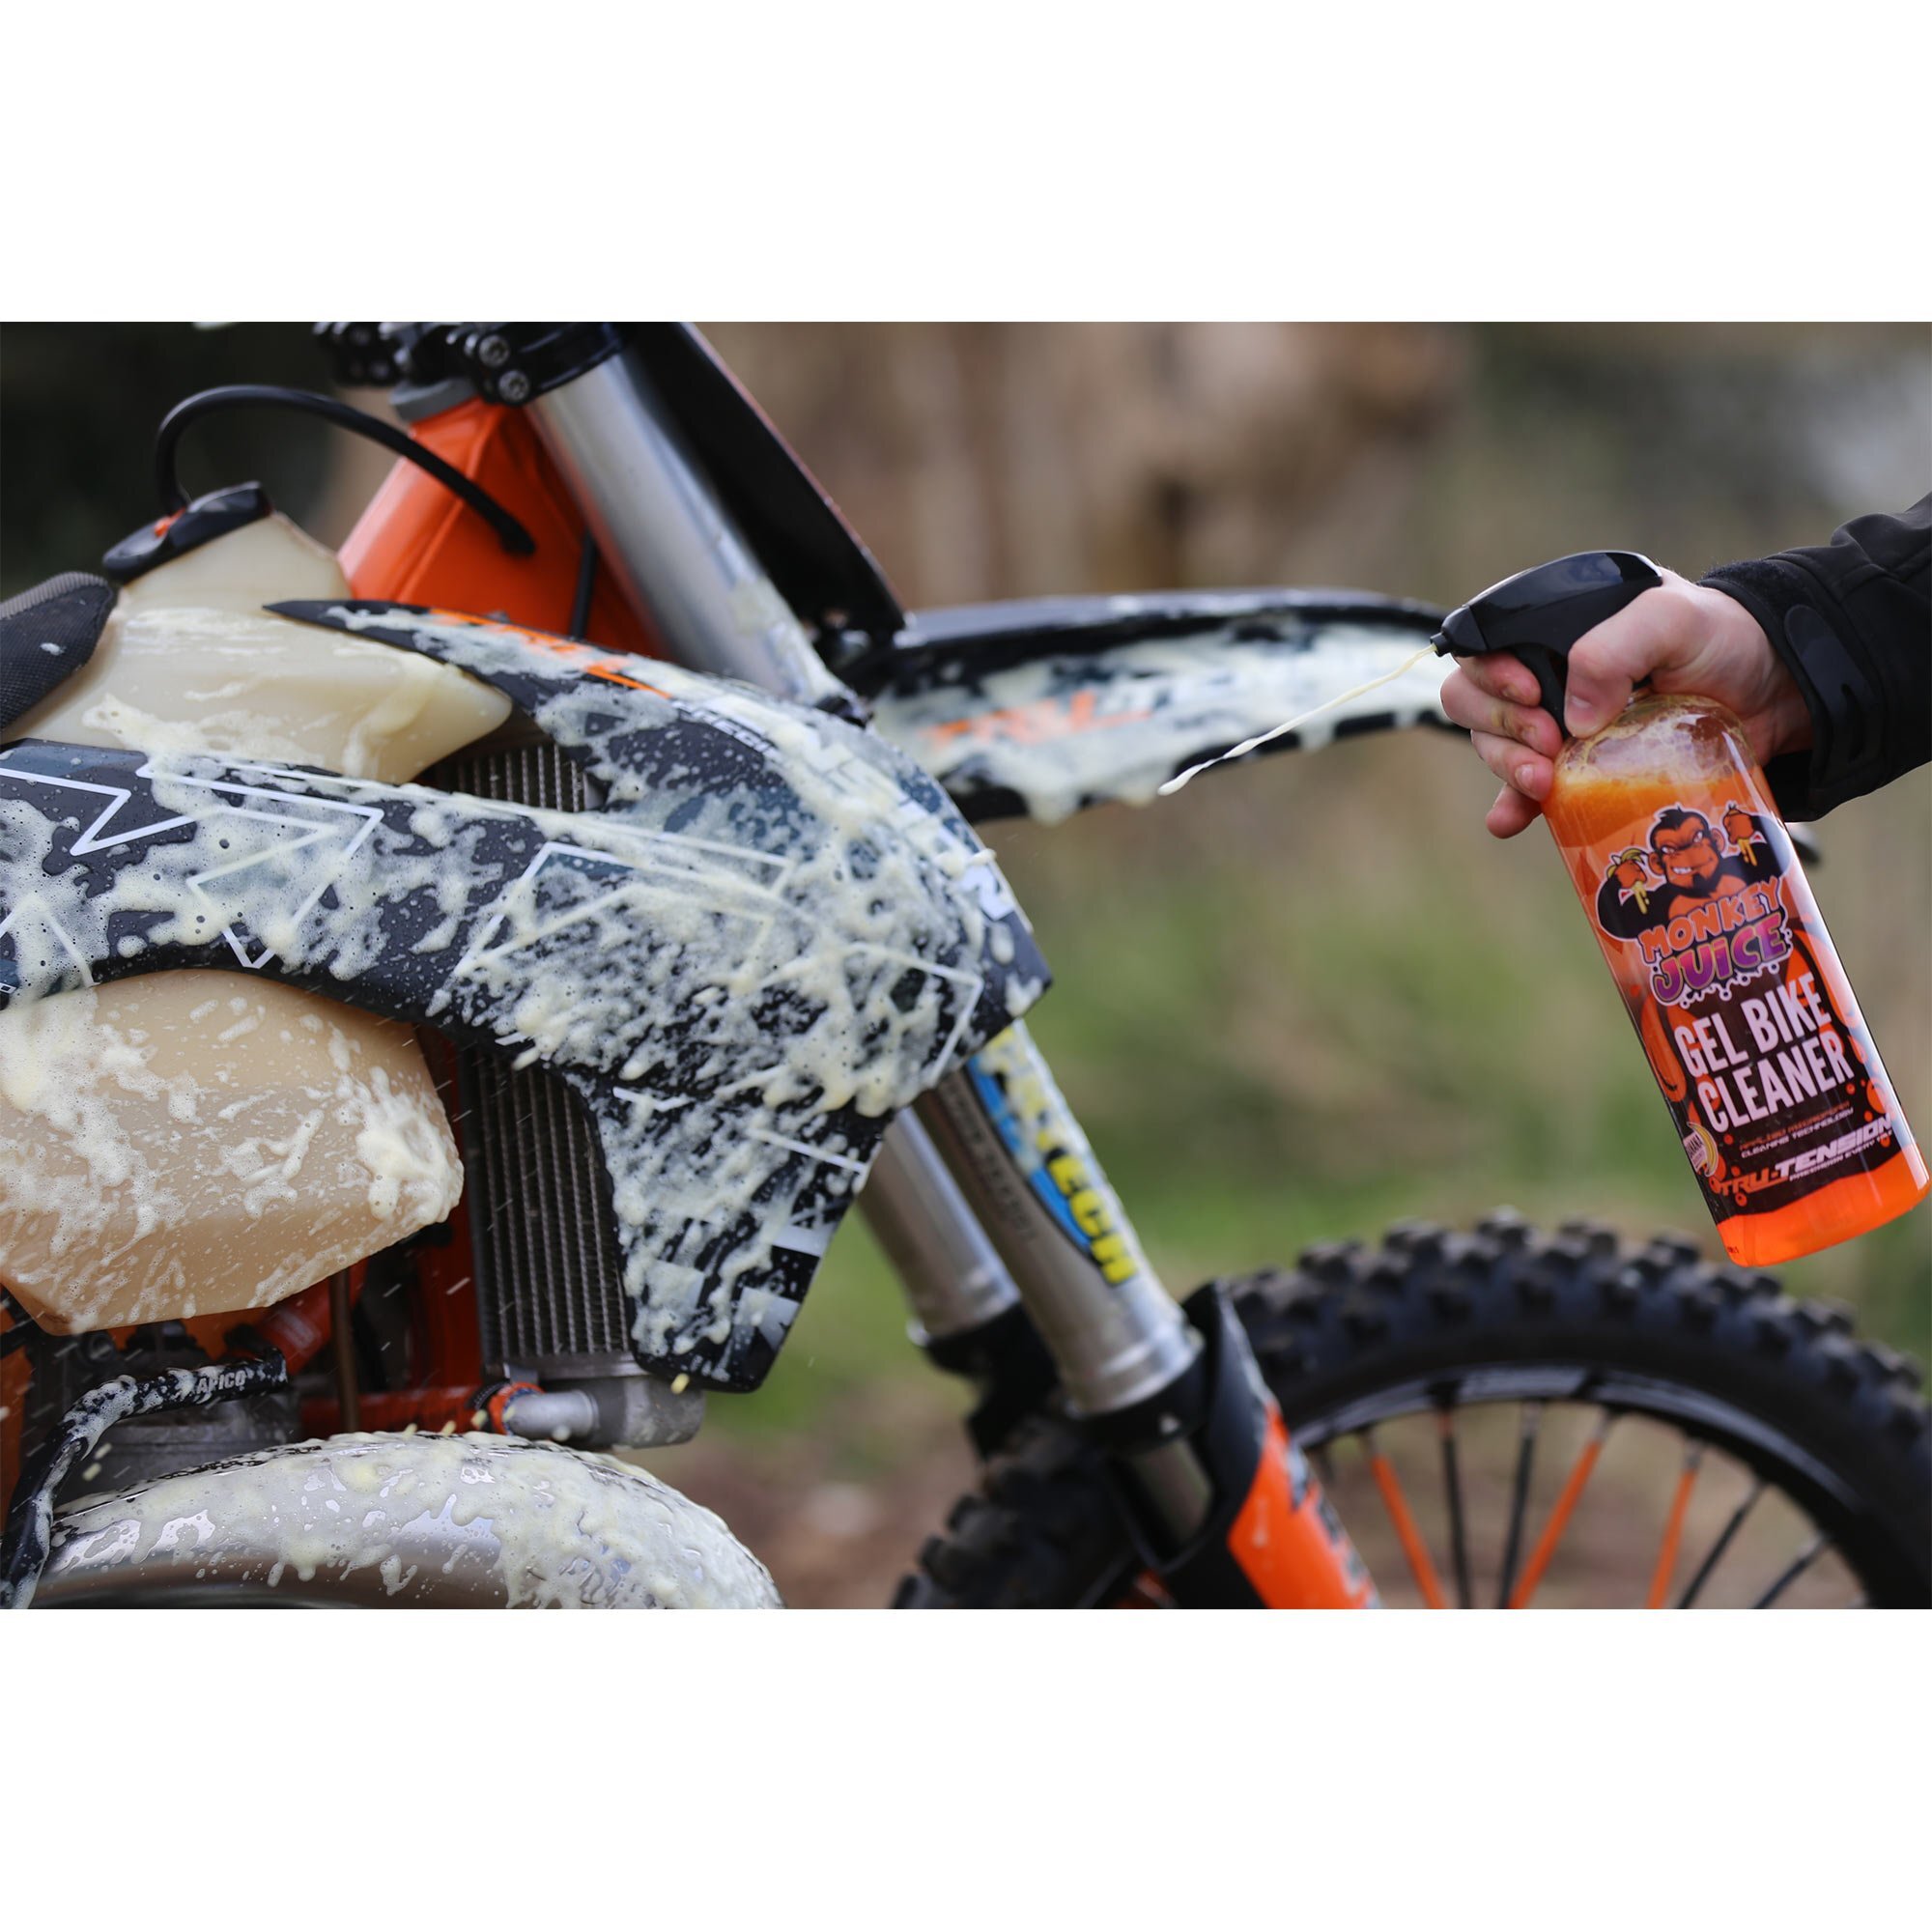 Bike Cleaner Concentrate, Bicycle & Motorcycle Cleaning